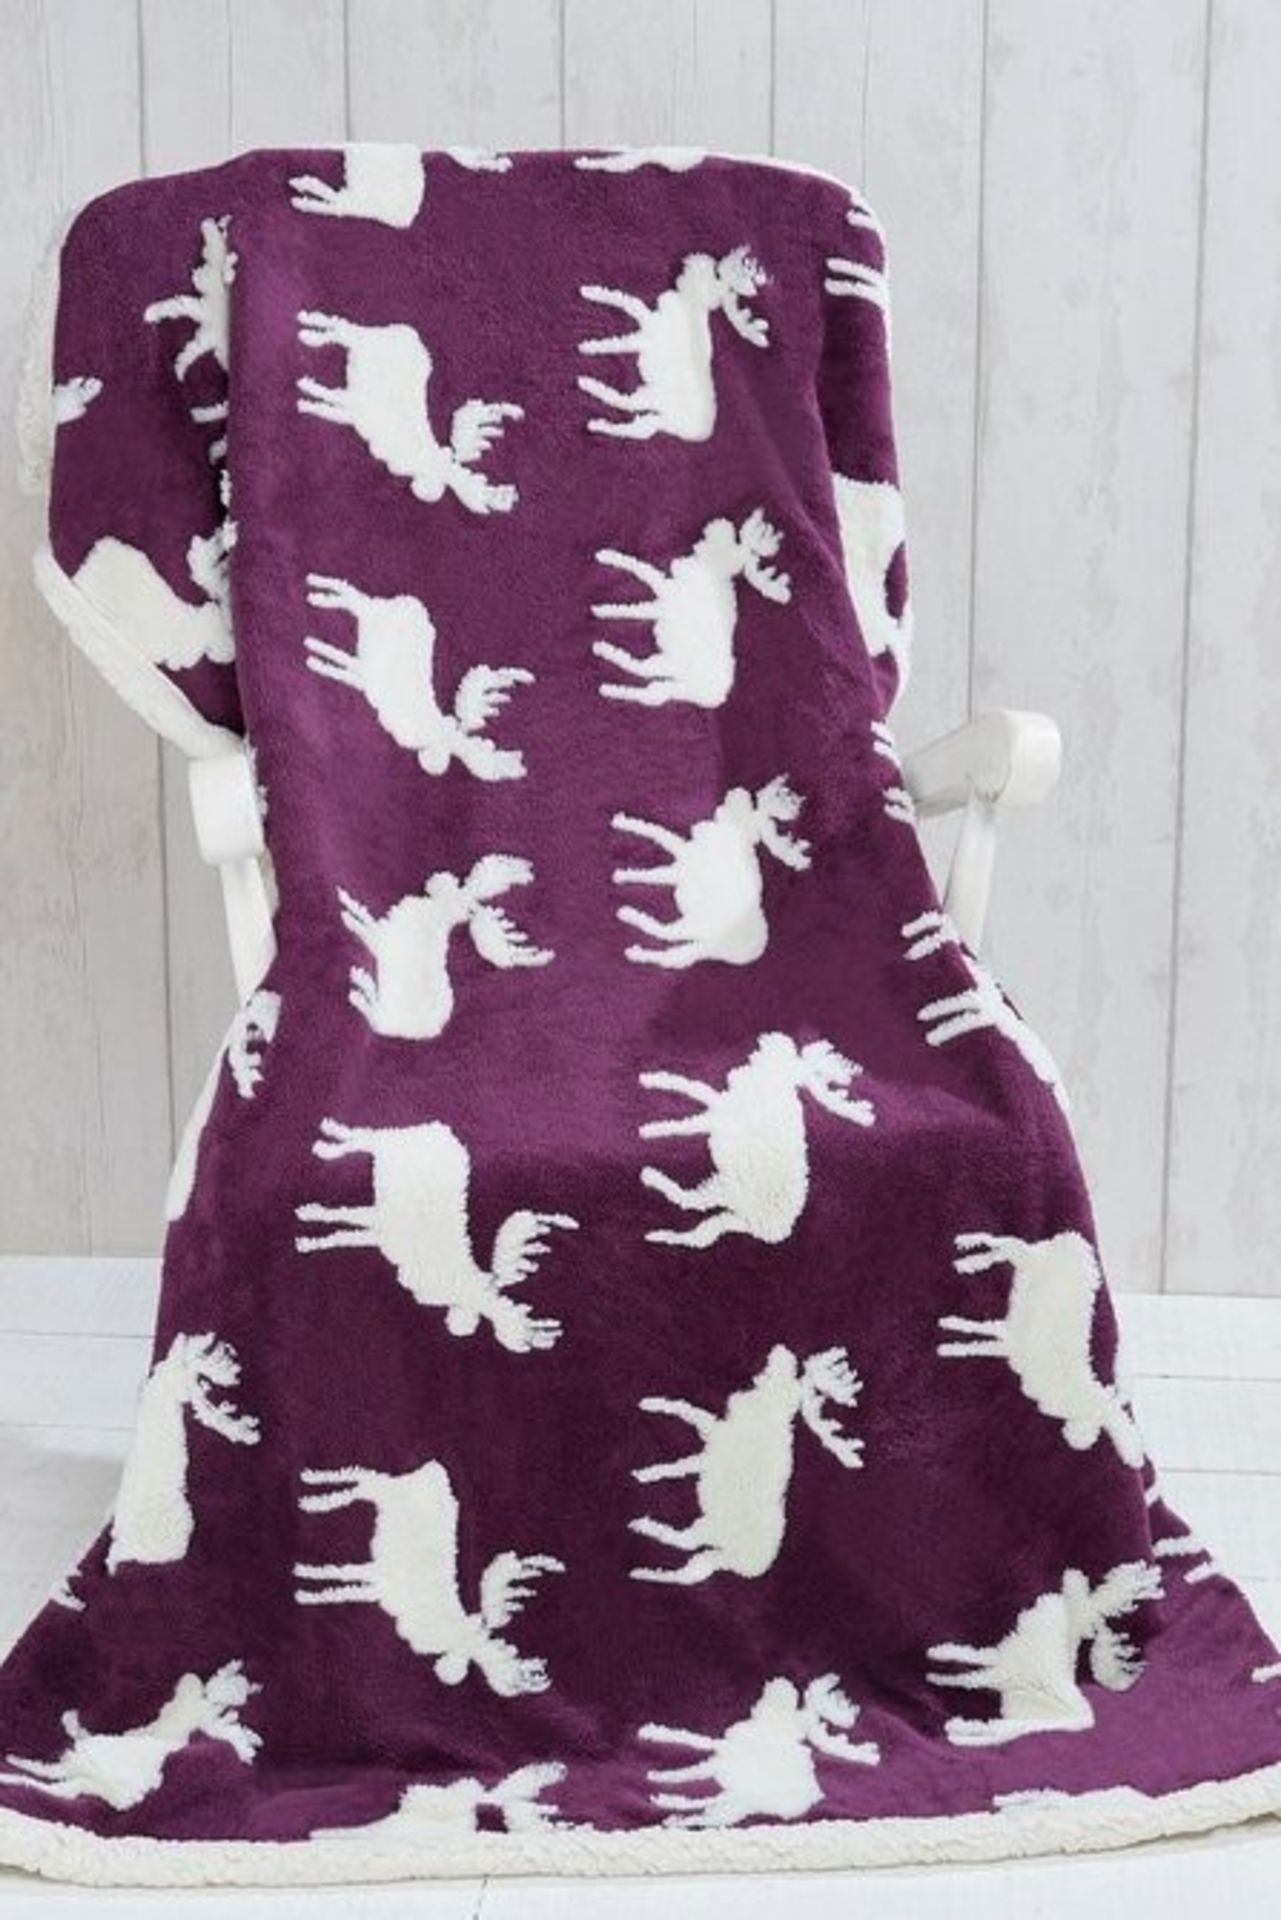 1 BAGGED TEDDY 3D STAG THROW IN PLUM (PUBLIC VIEWING AVAILABLE)